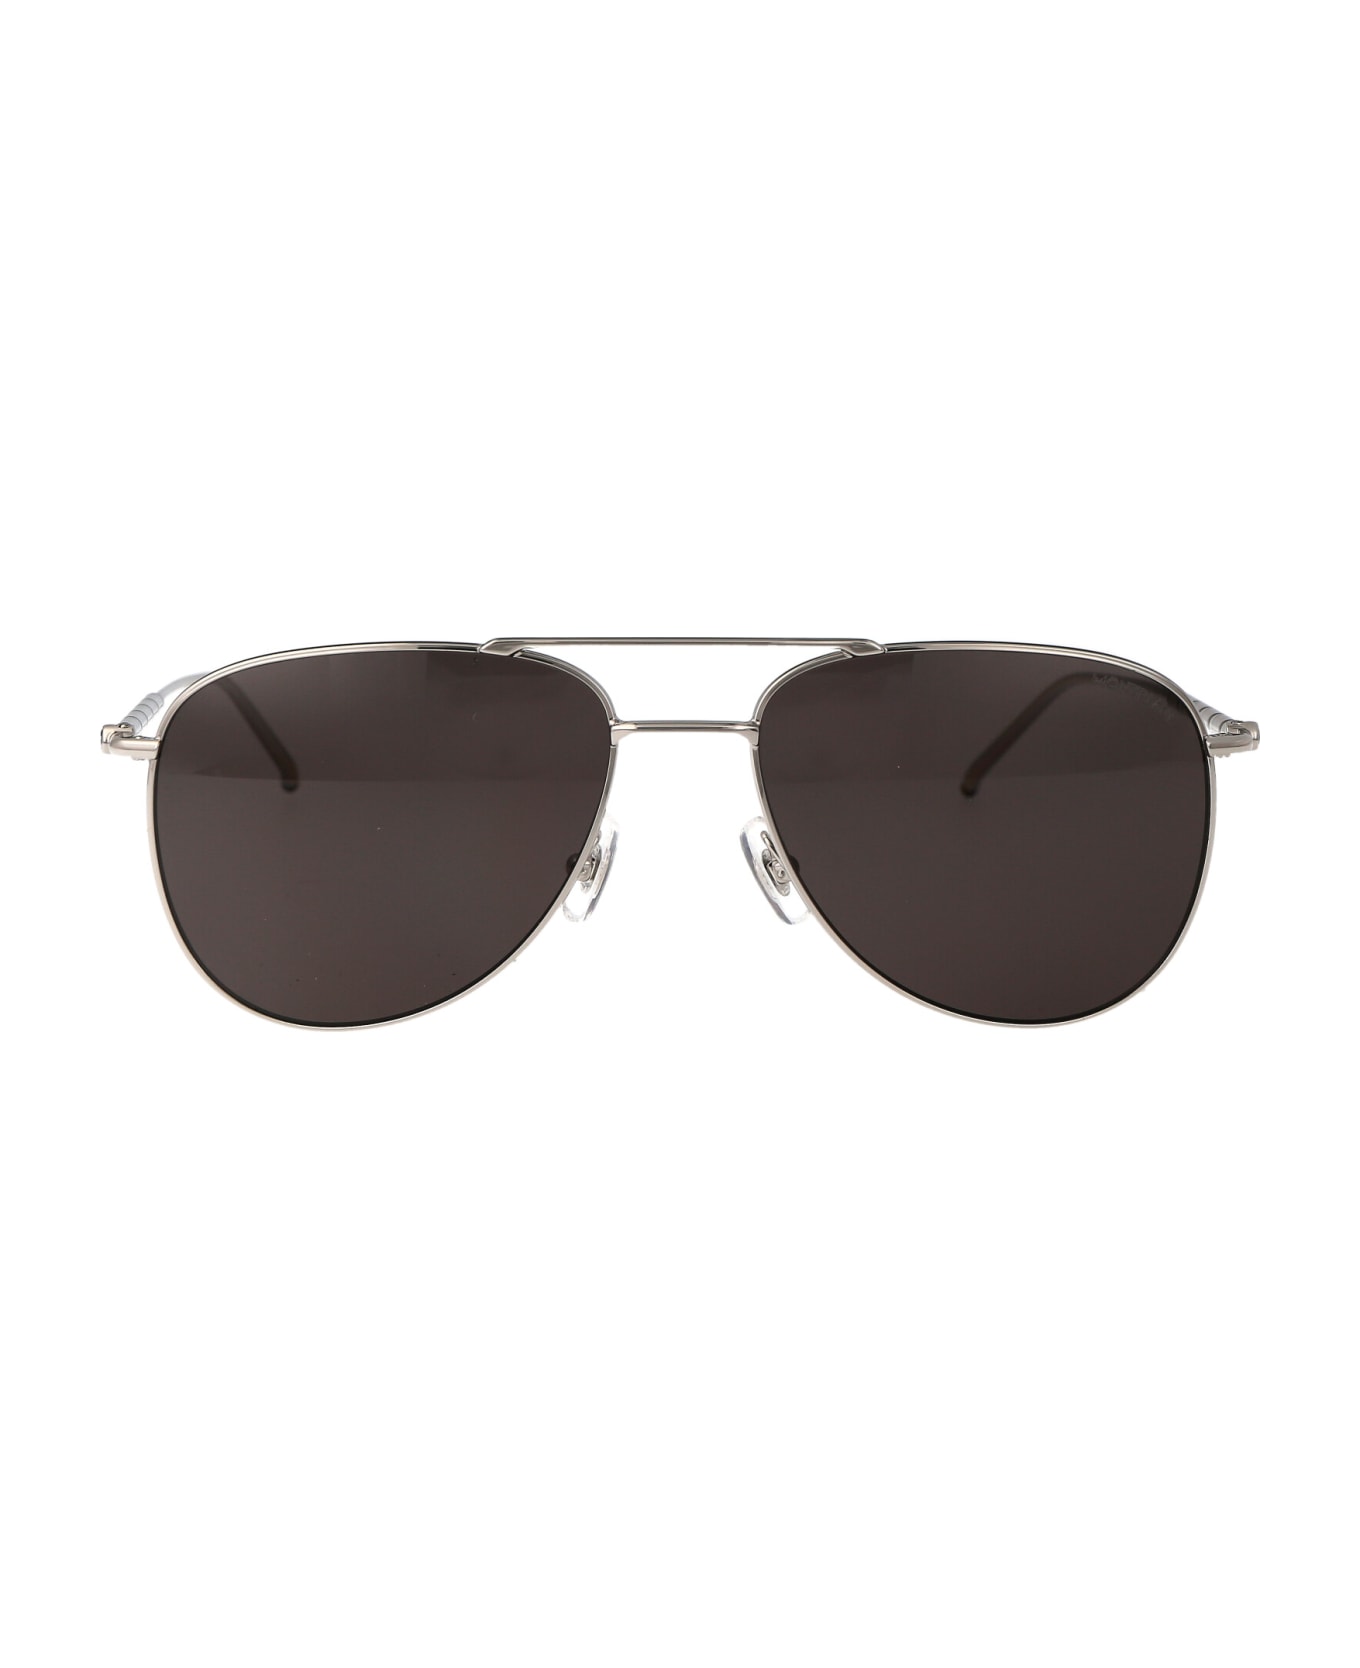 Montblanc Mb0311s Sunglasses - 001 SILVER SILVER GREY